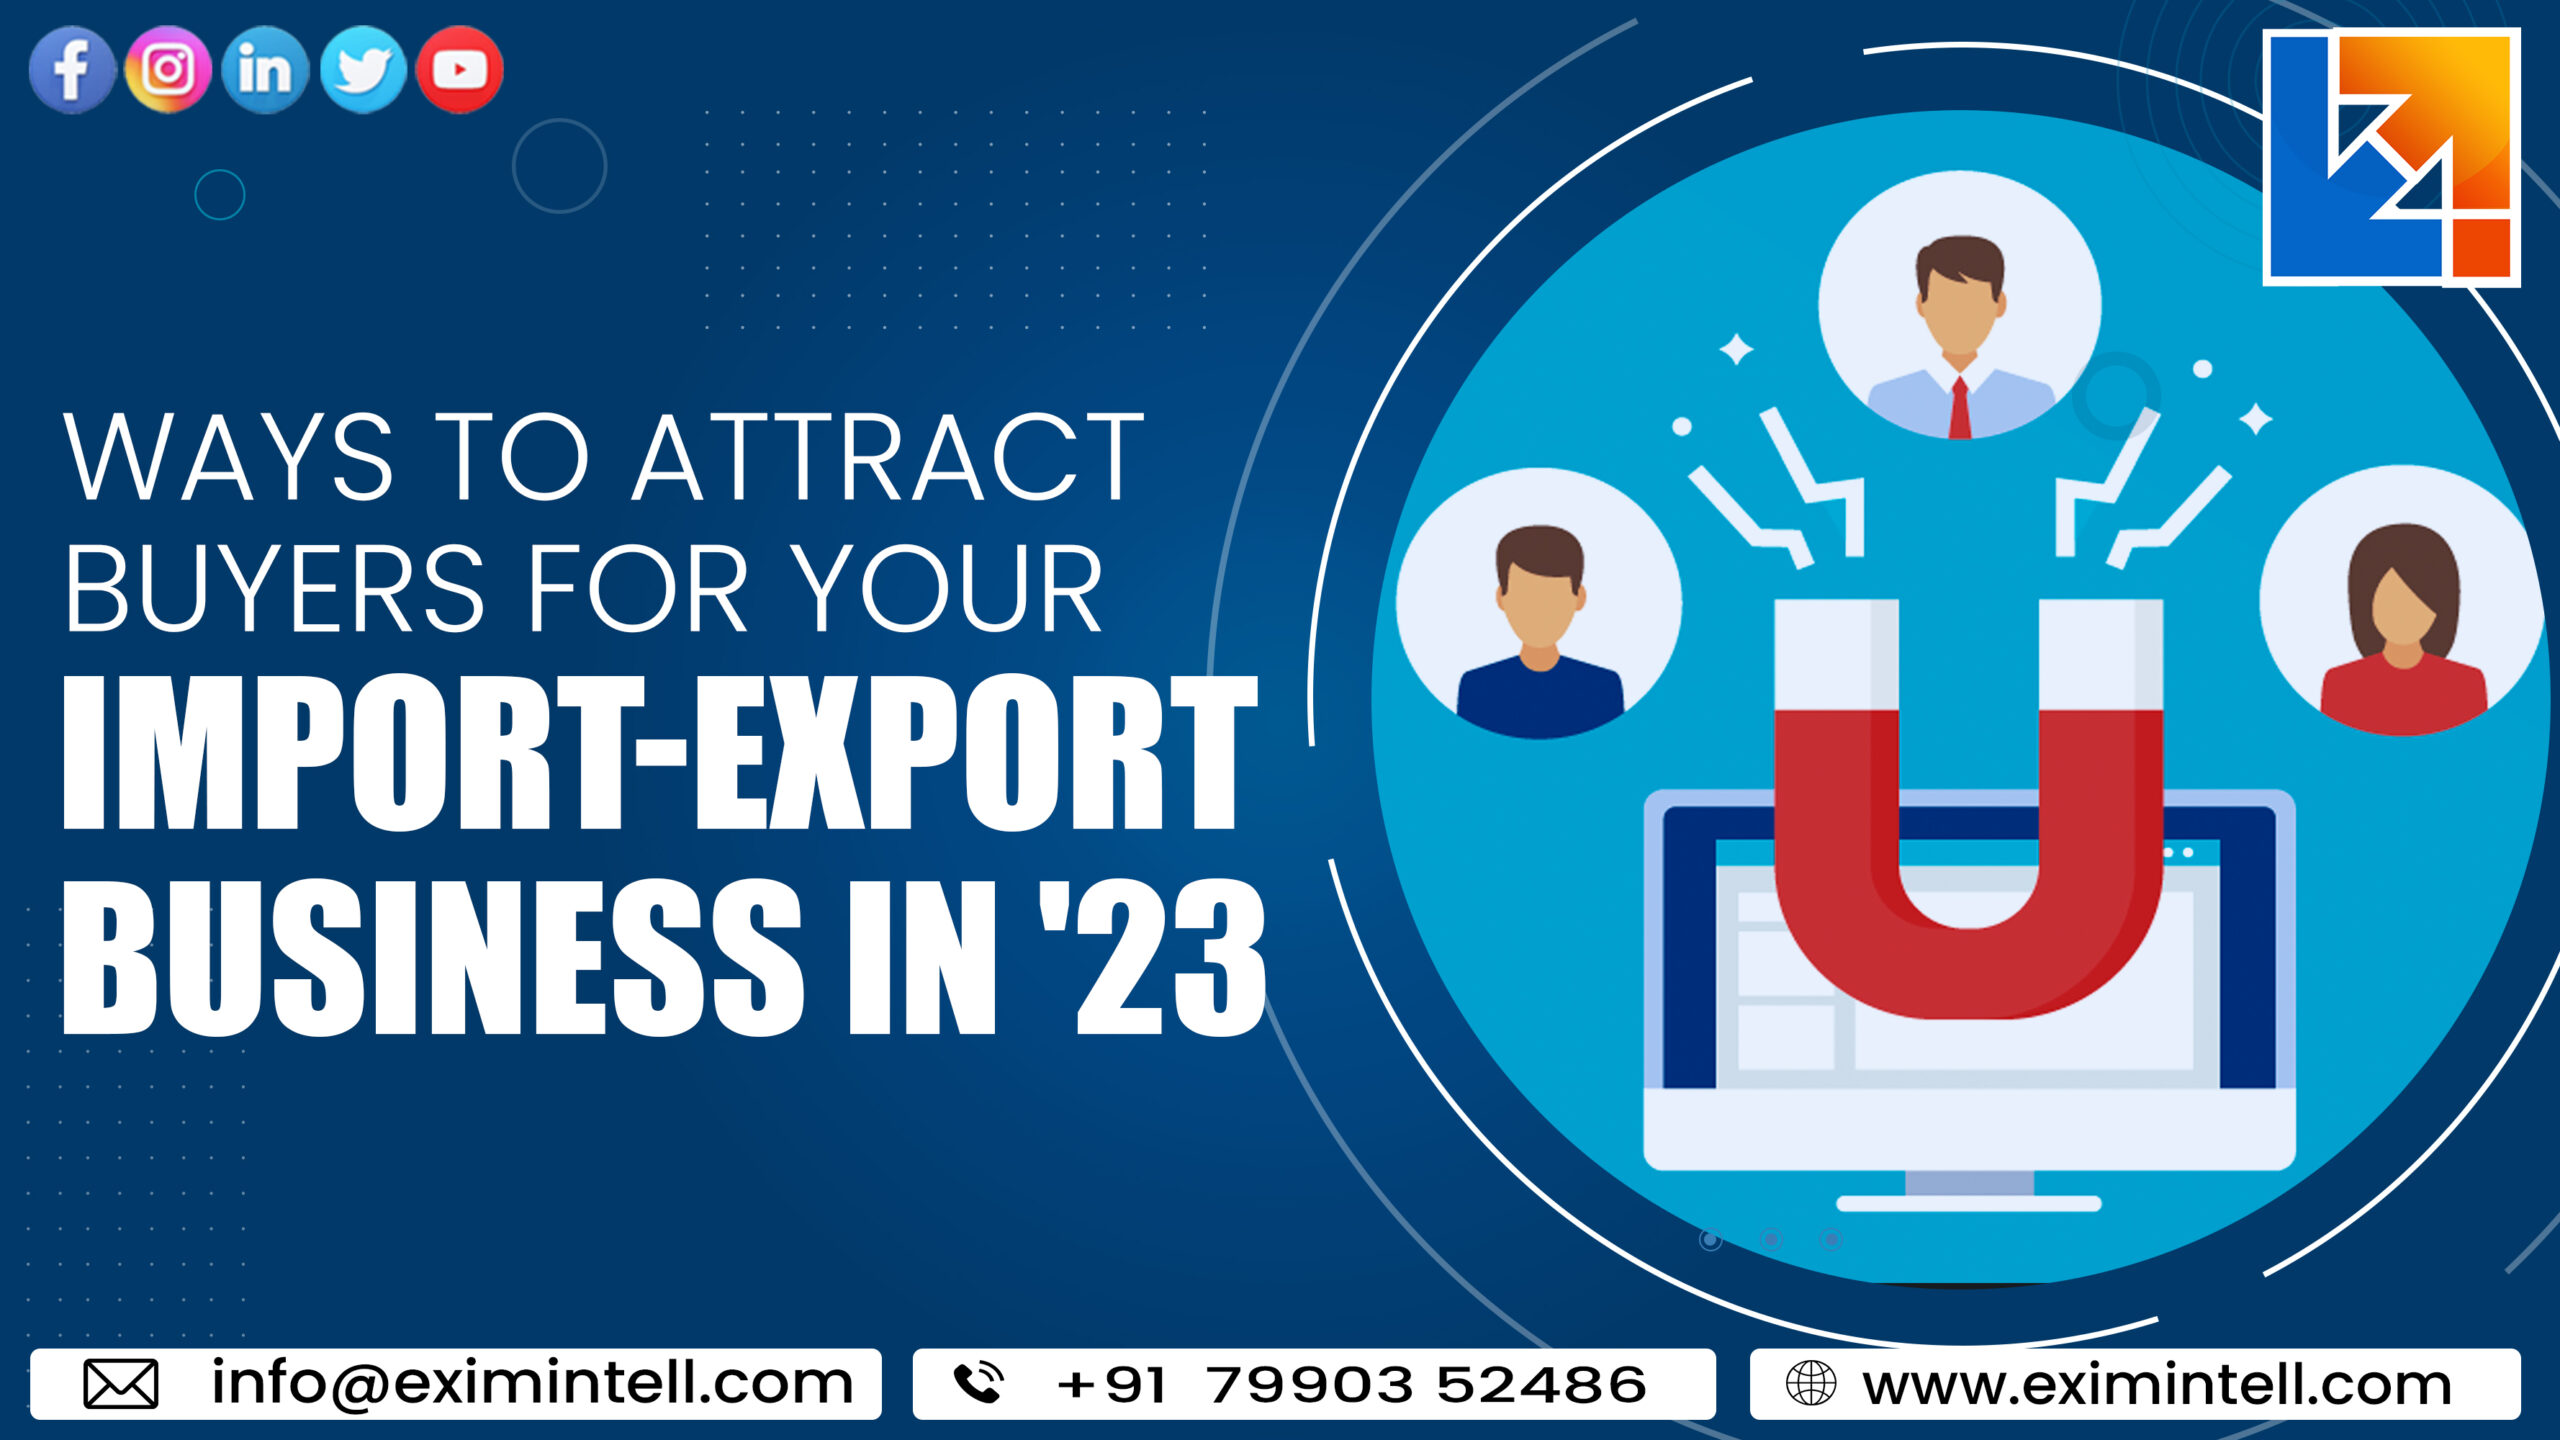 Ways to Attract Buyers for Your Import-Export Business in ’23